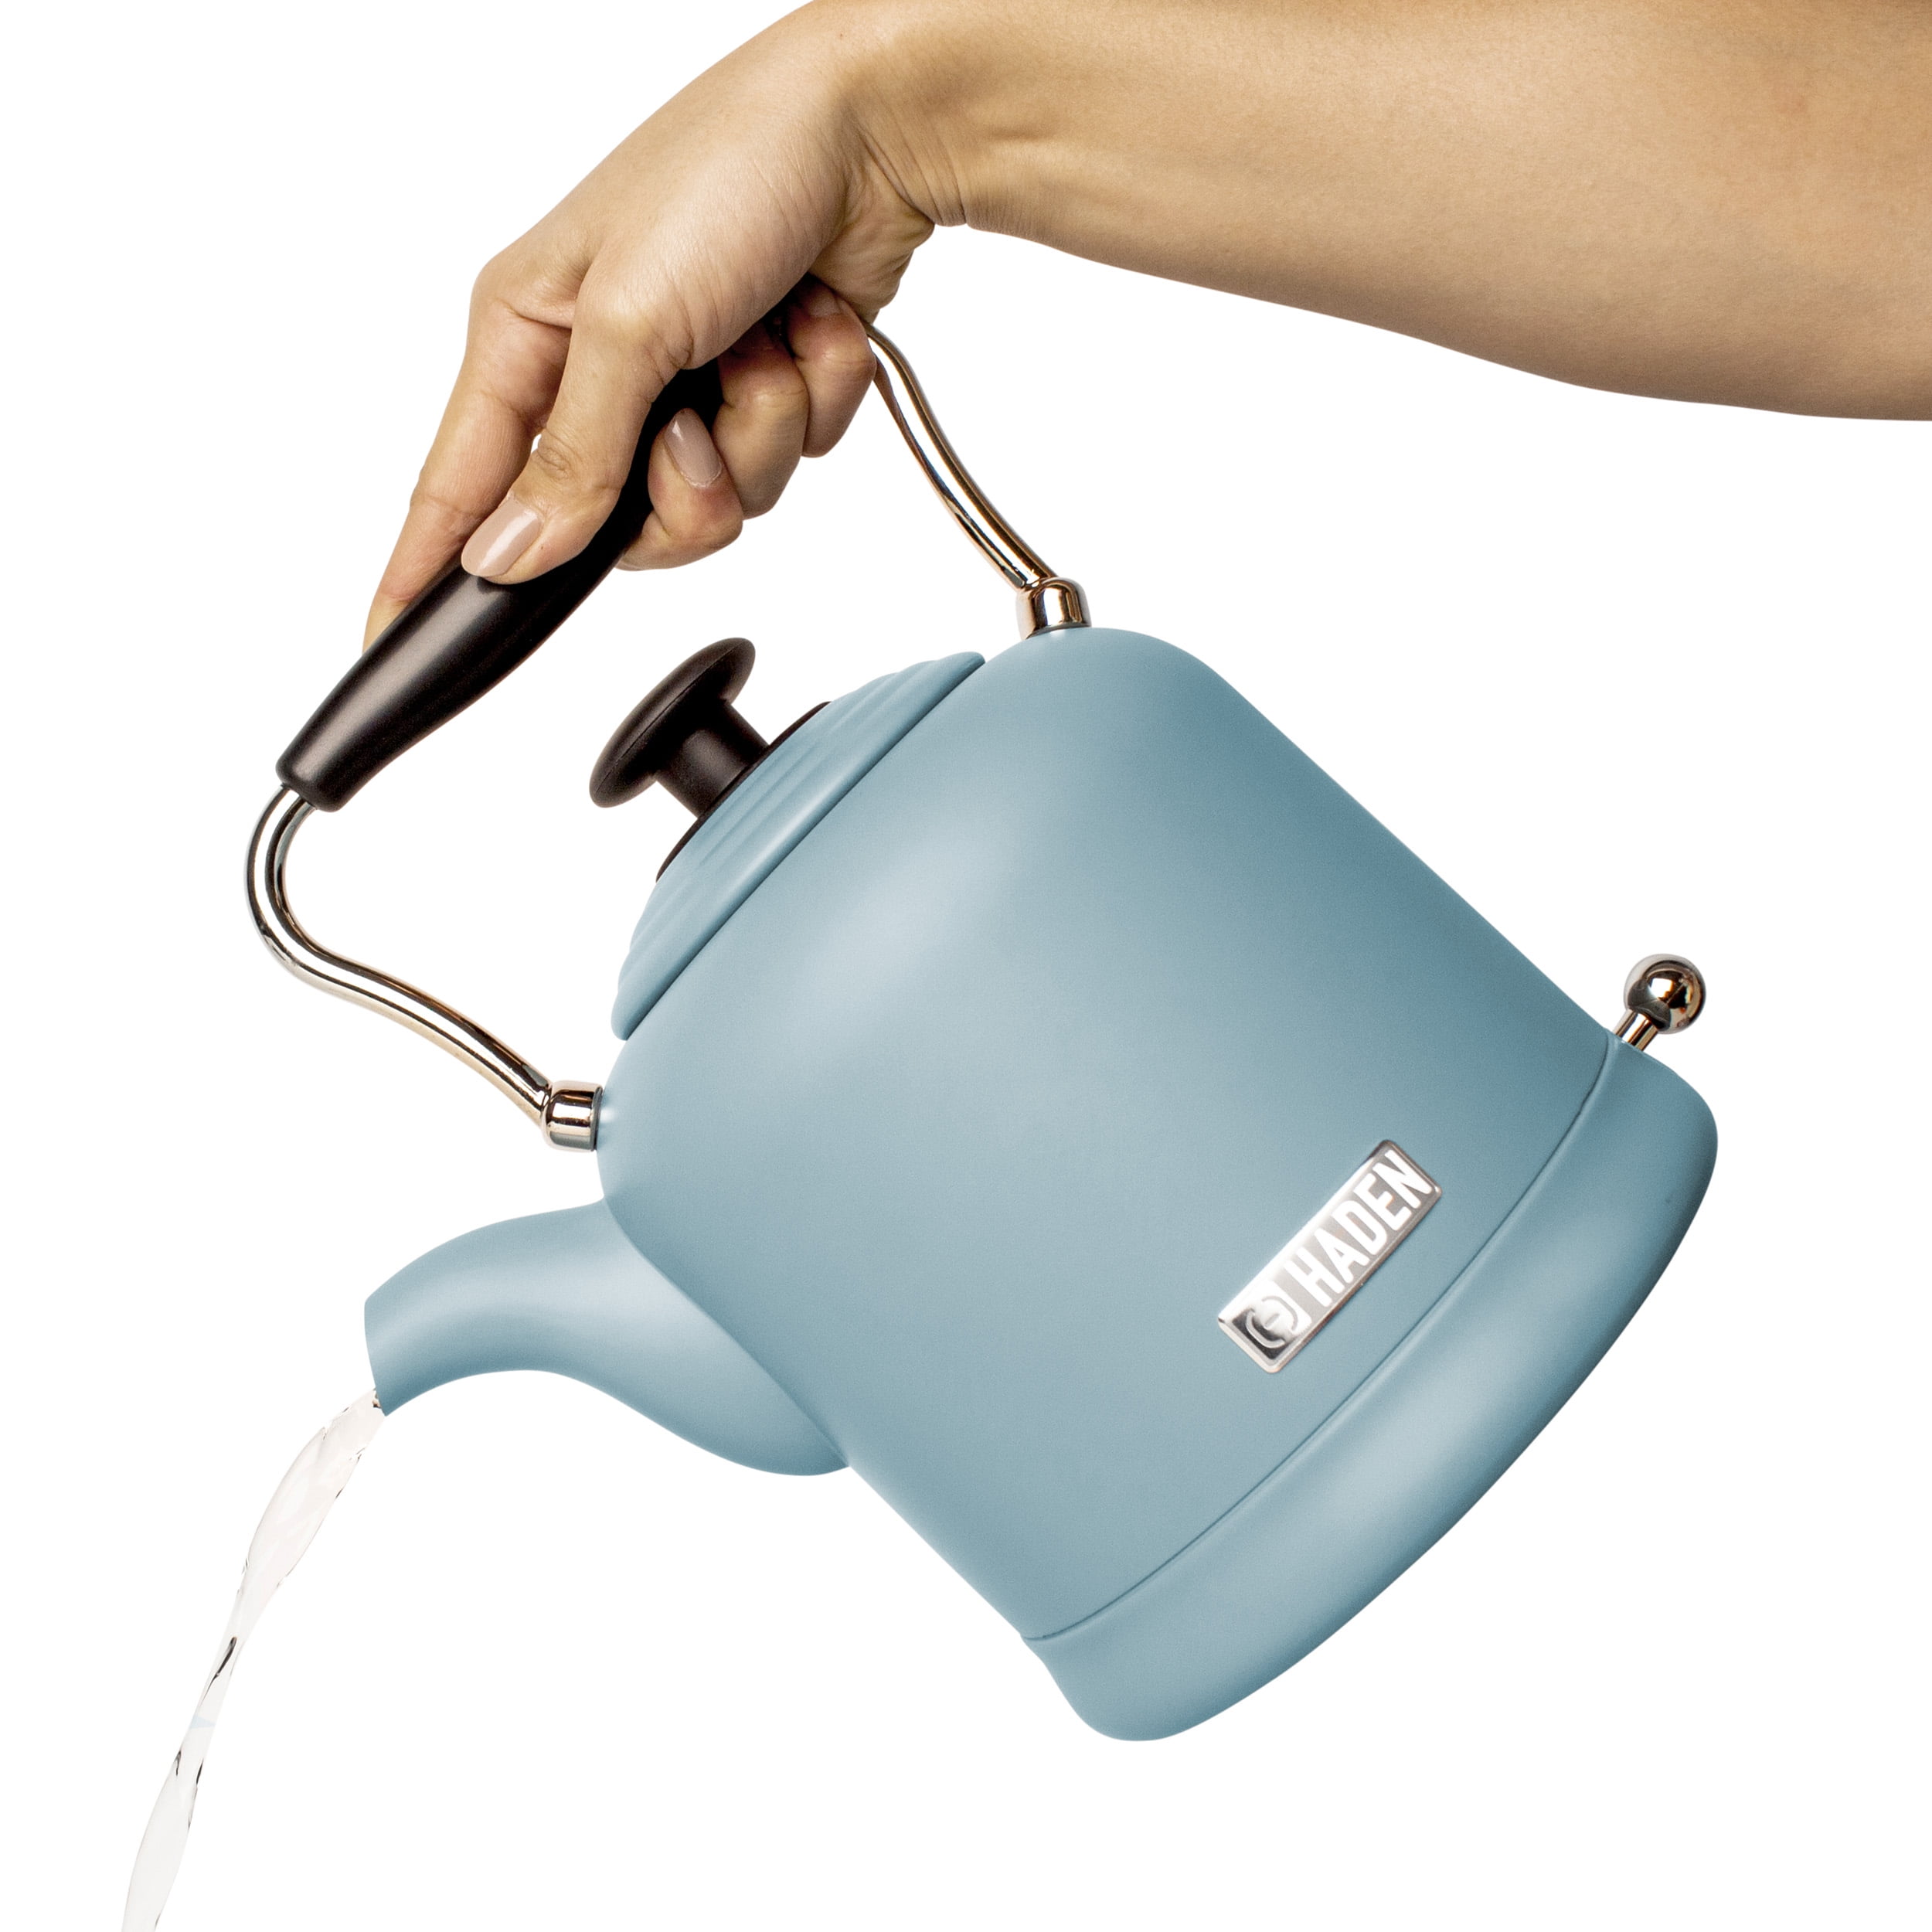 Haden Cotswold 1.8 qt. Stainless Steel Electric Tea Kettle Haden US Color:  Putty Beige - Yahoo Shopping